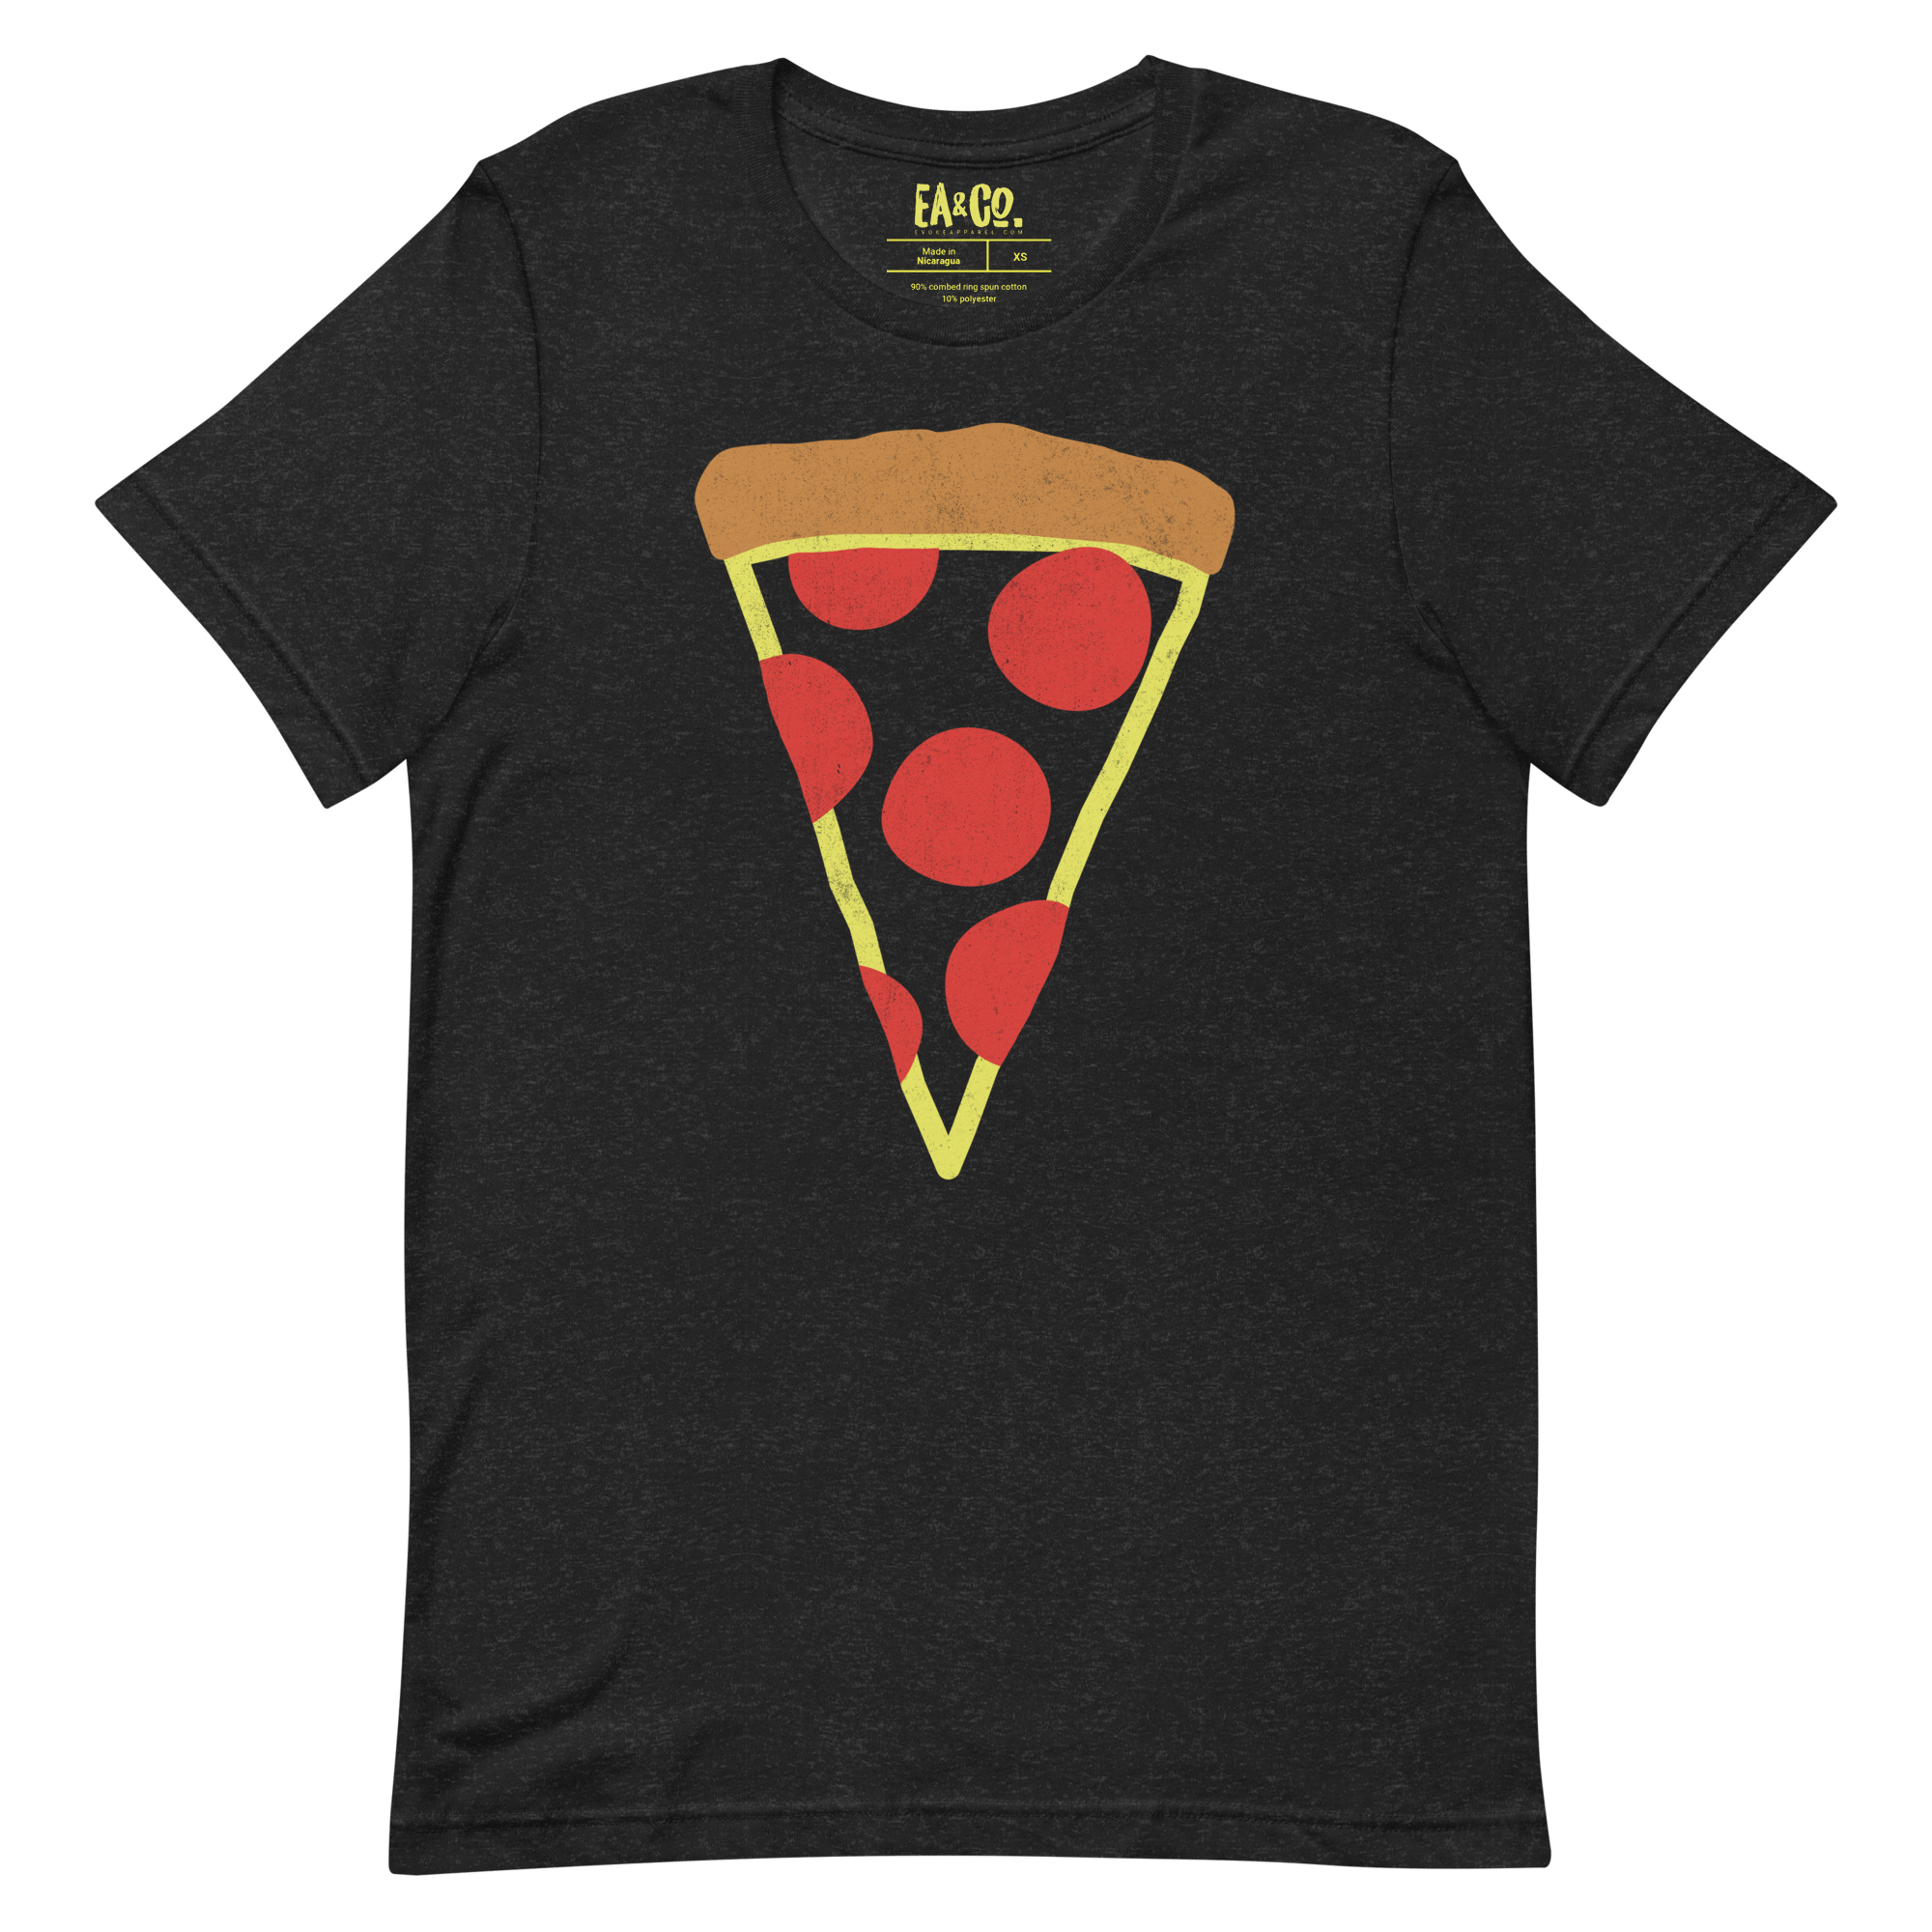 Pizza Slice Tee - Funny Foodie Graphic T-shirt | Evoke Apparel